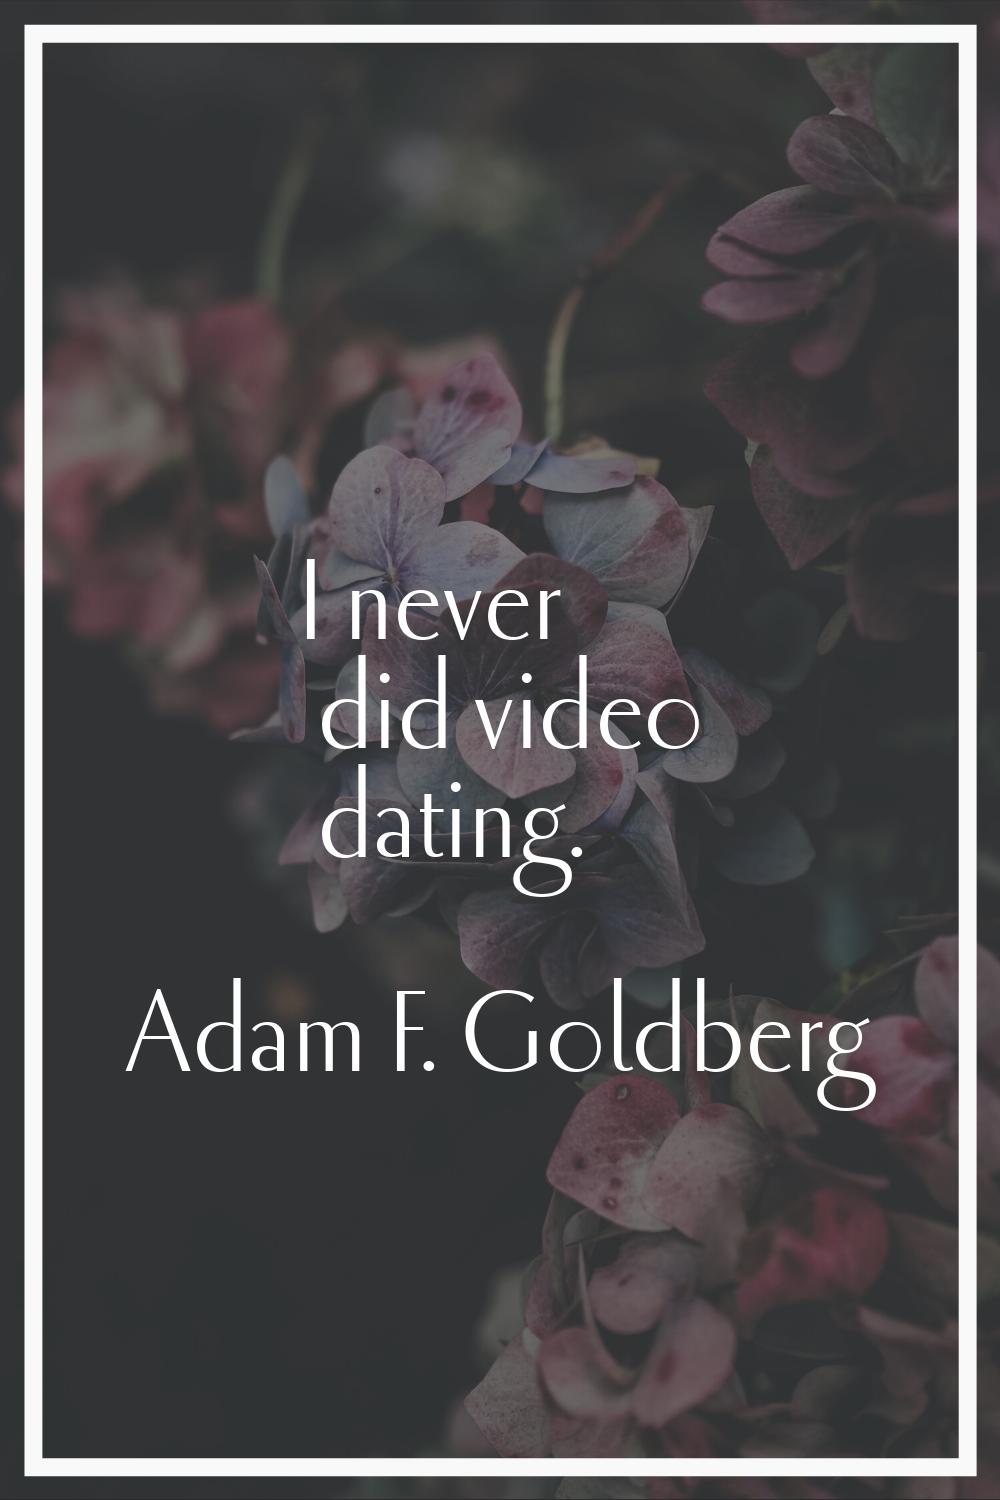 I never did video dating.